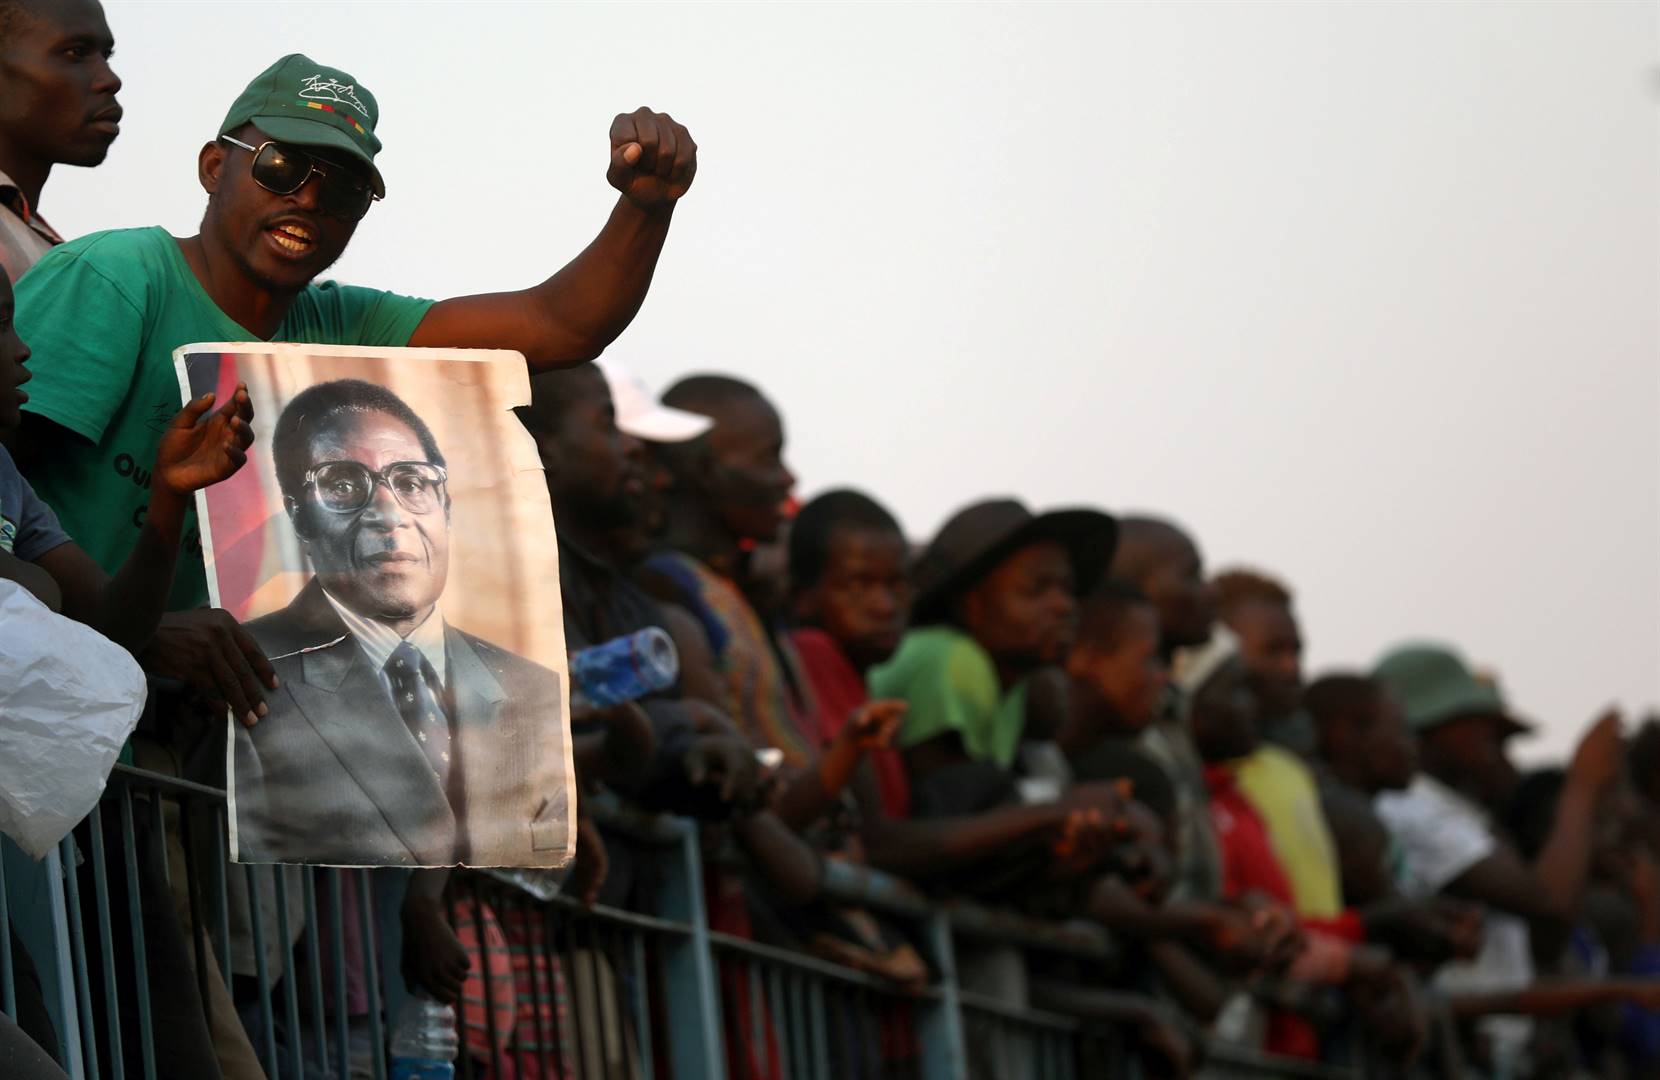 A mourner holds a poster of Robert Mugabe during the viewing of his body as it lies in state at the Rufaro stadium. Picture: Siphiwe Sibeko/Reuters